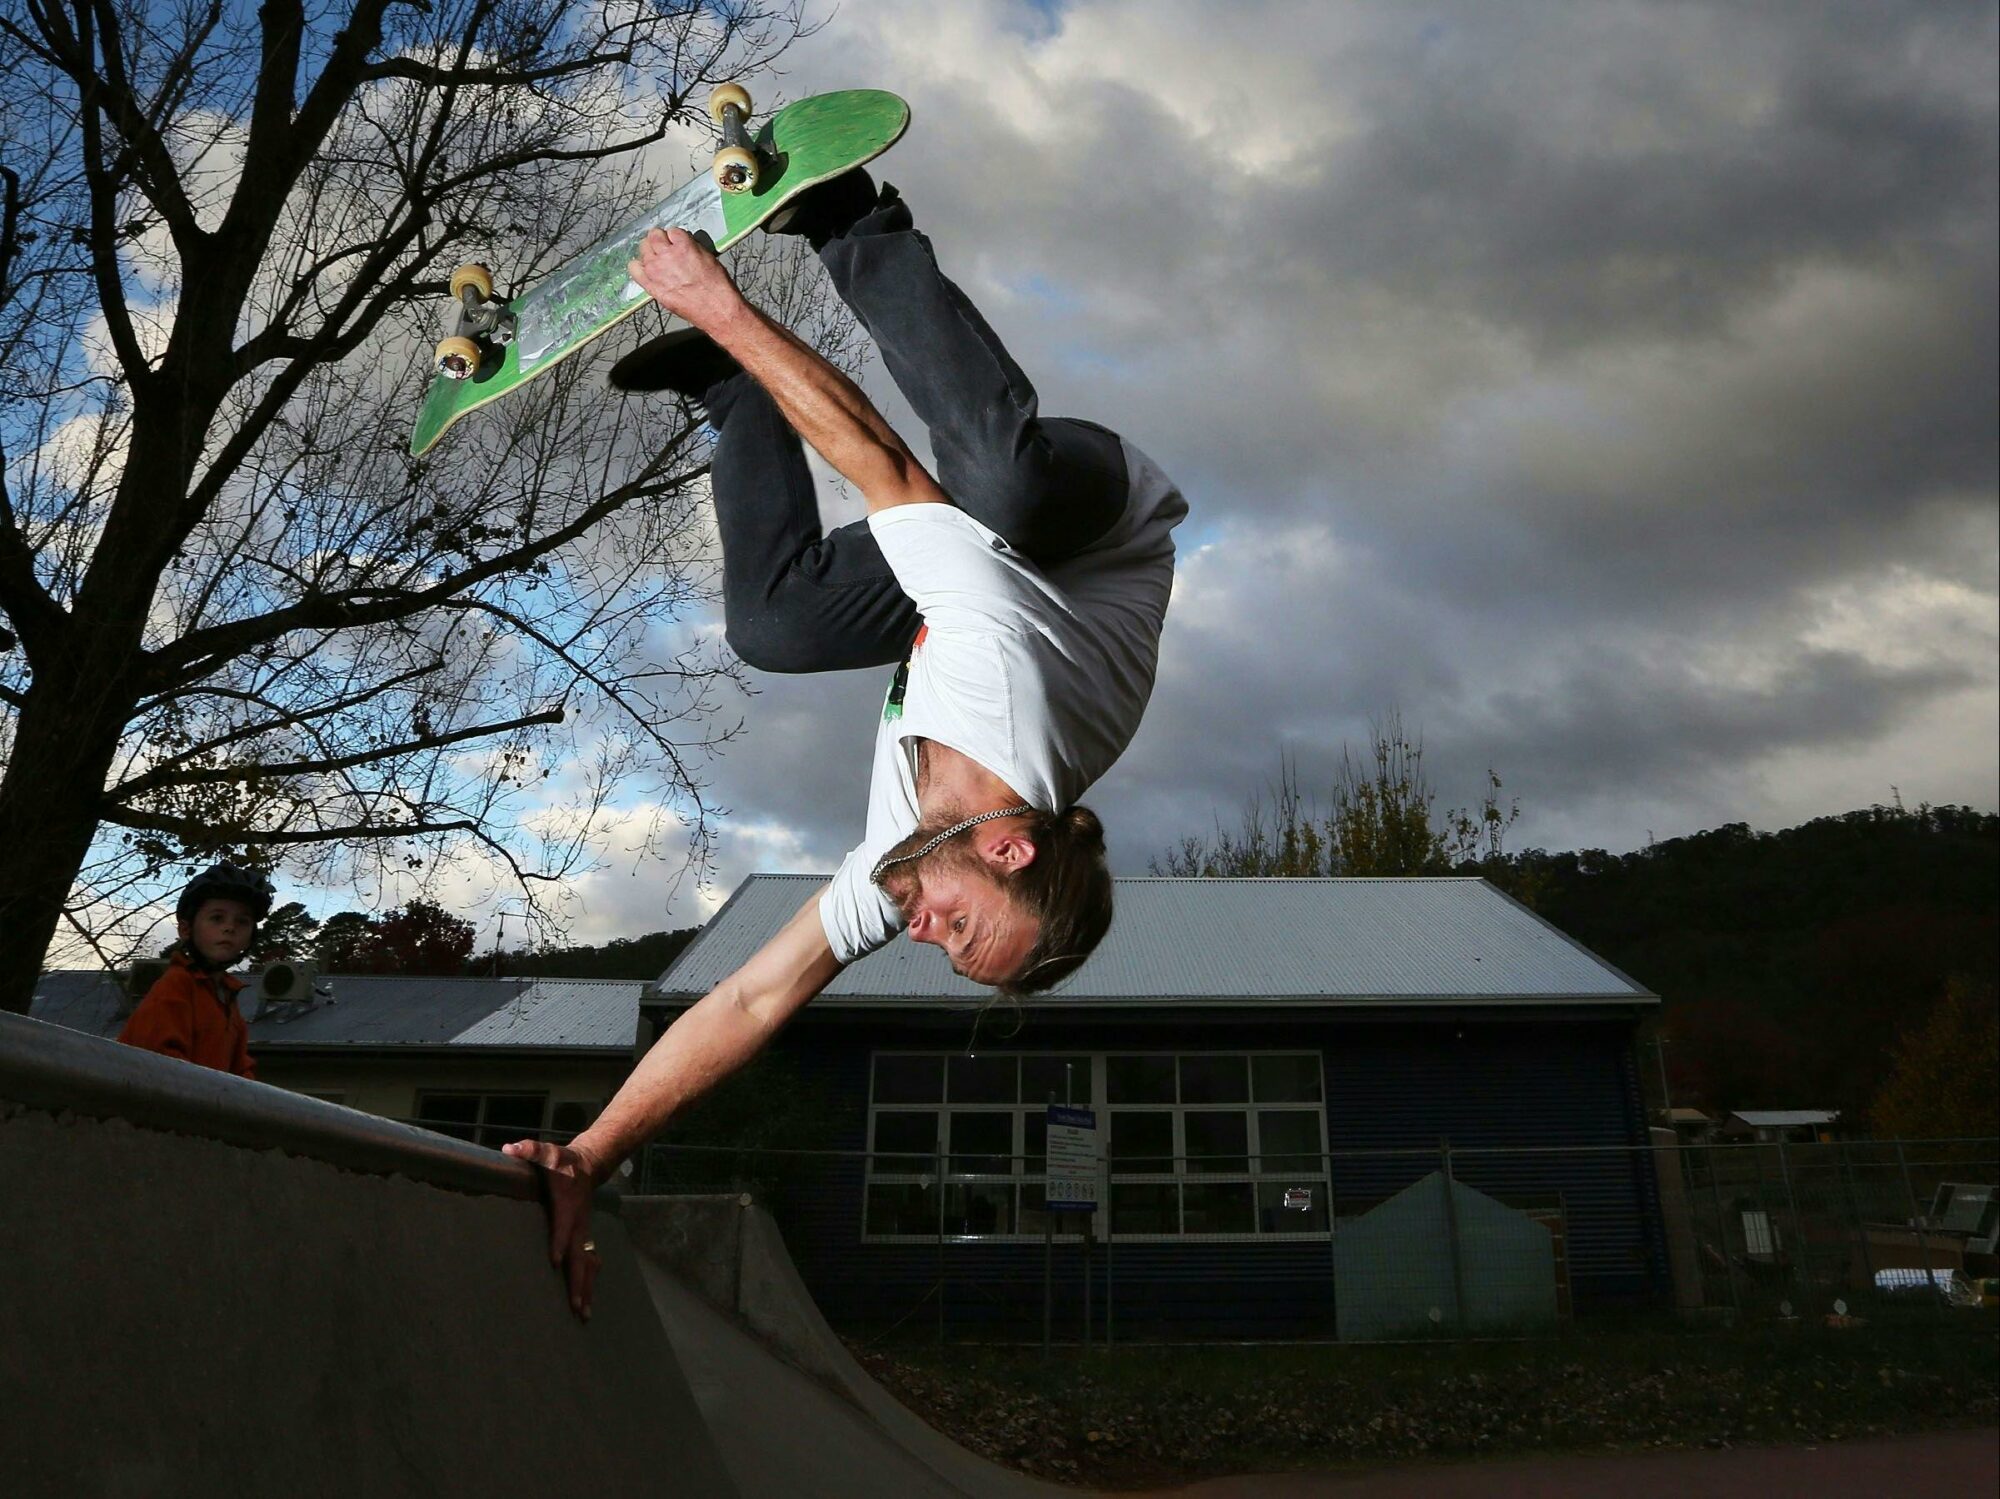 North East Skate Park Series - Round Fourteen, Mount Beauty